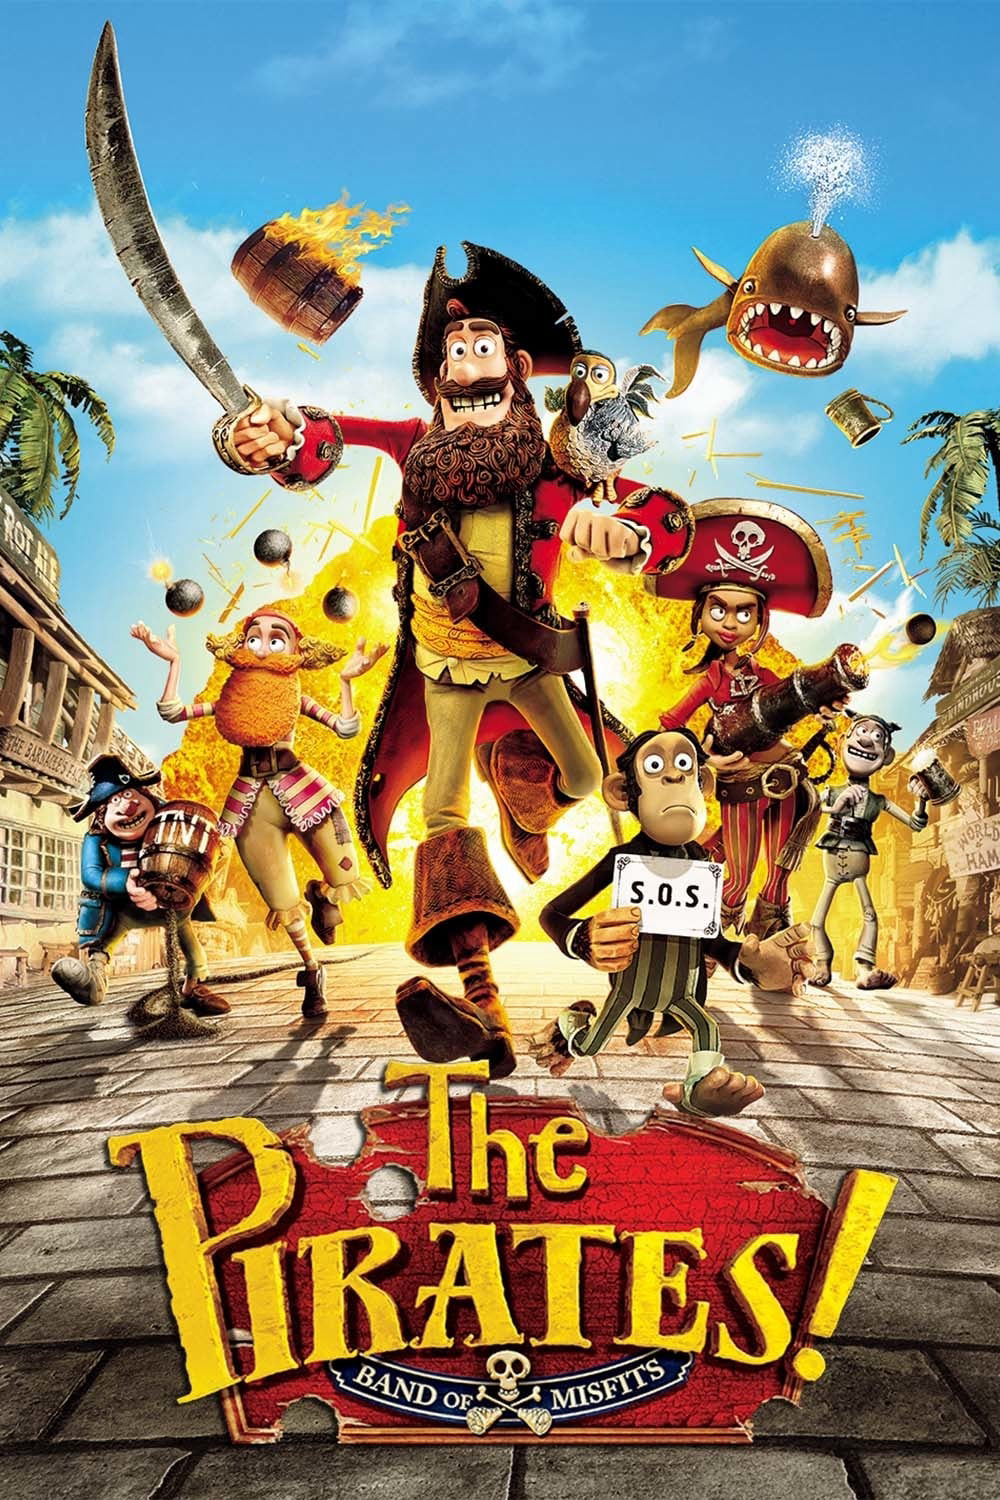 Hoa Vương Hải Tặc - The Pirates! In an Adventure with Scientists!